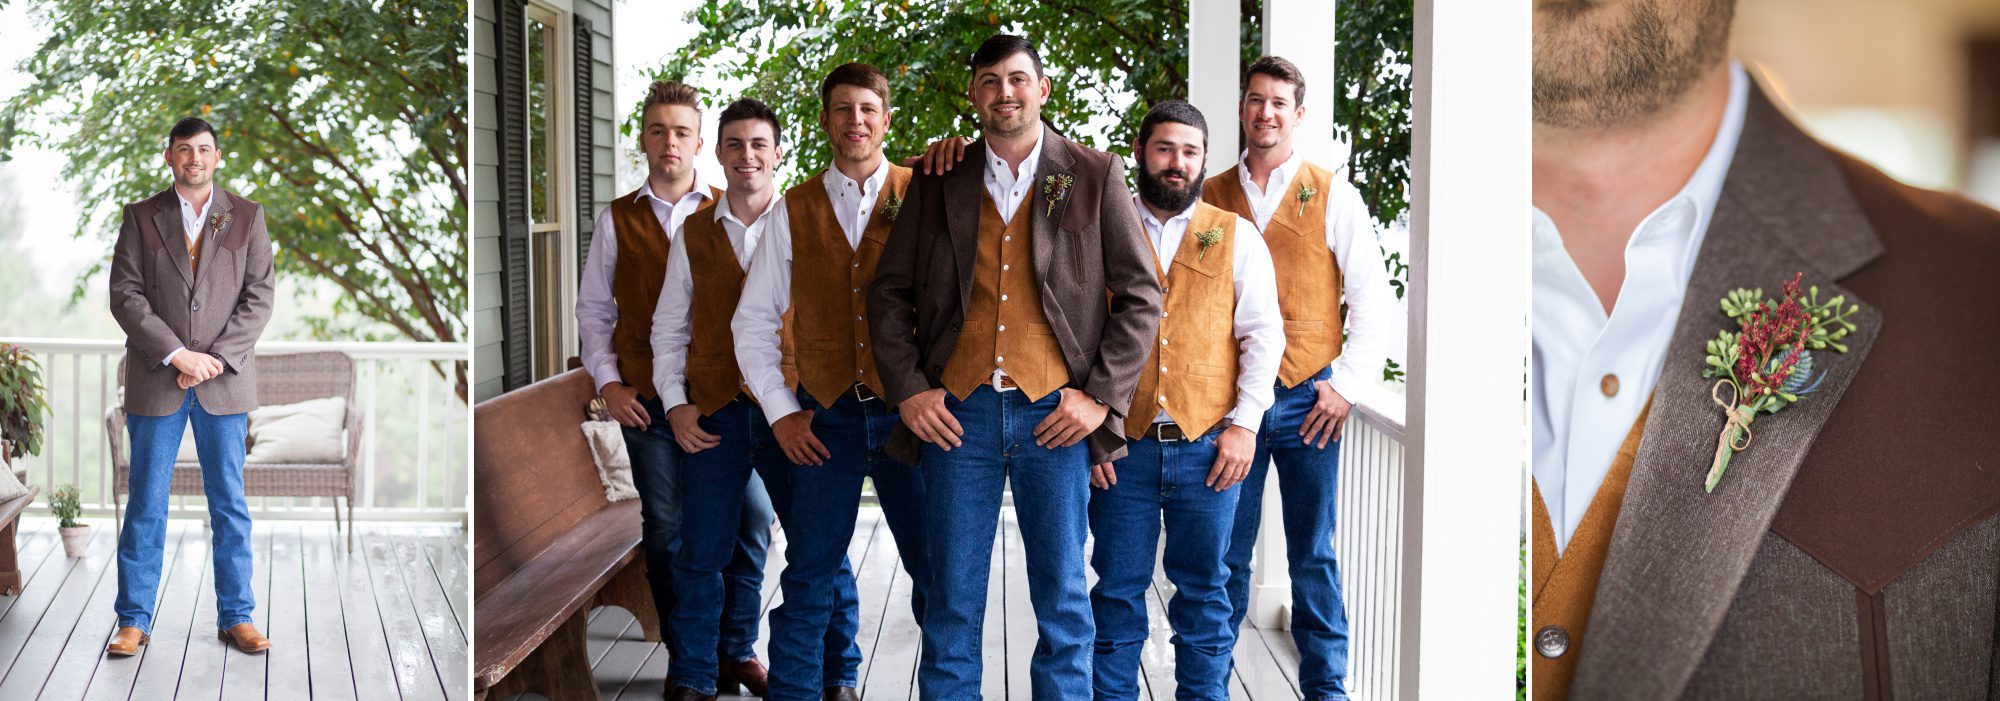 Groomsmen pose for a photobefore wedding reception details before wedding ceremony photography at Front Porch Farms, Wedding photography by Krista Lee